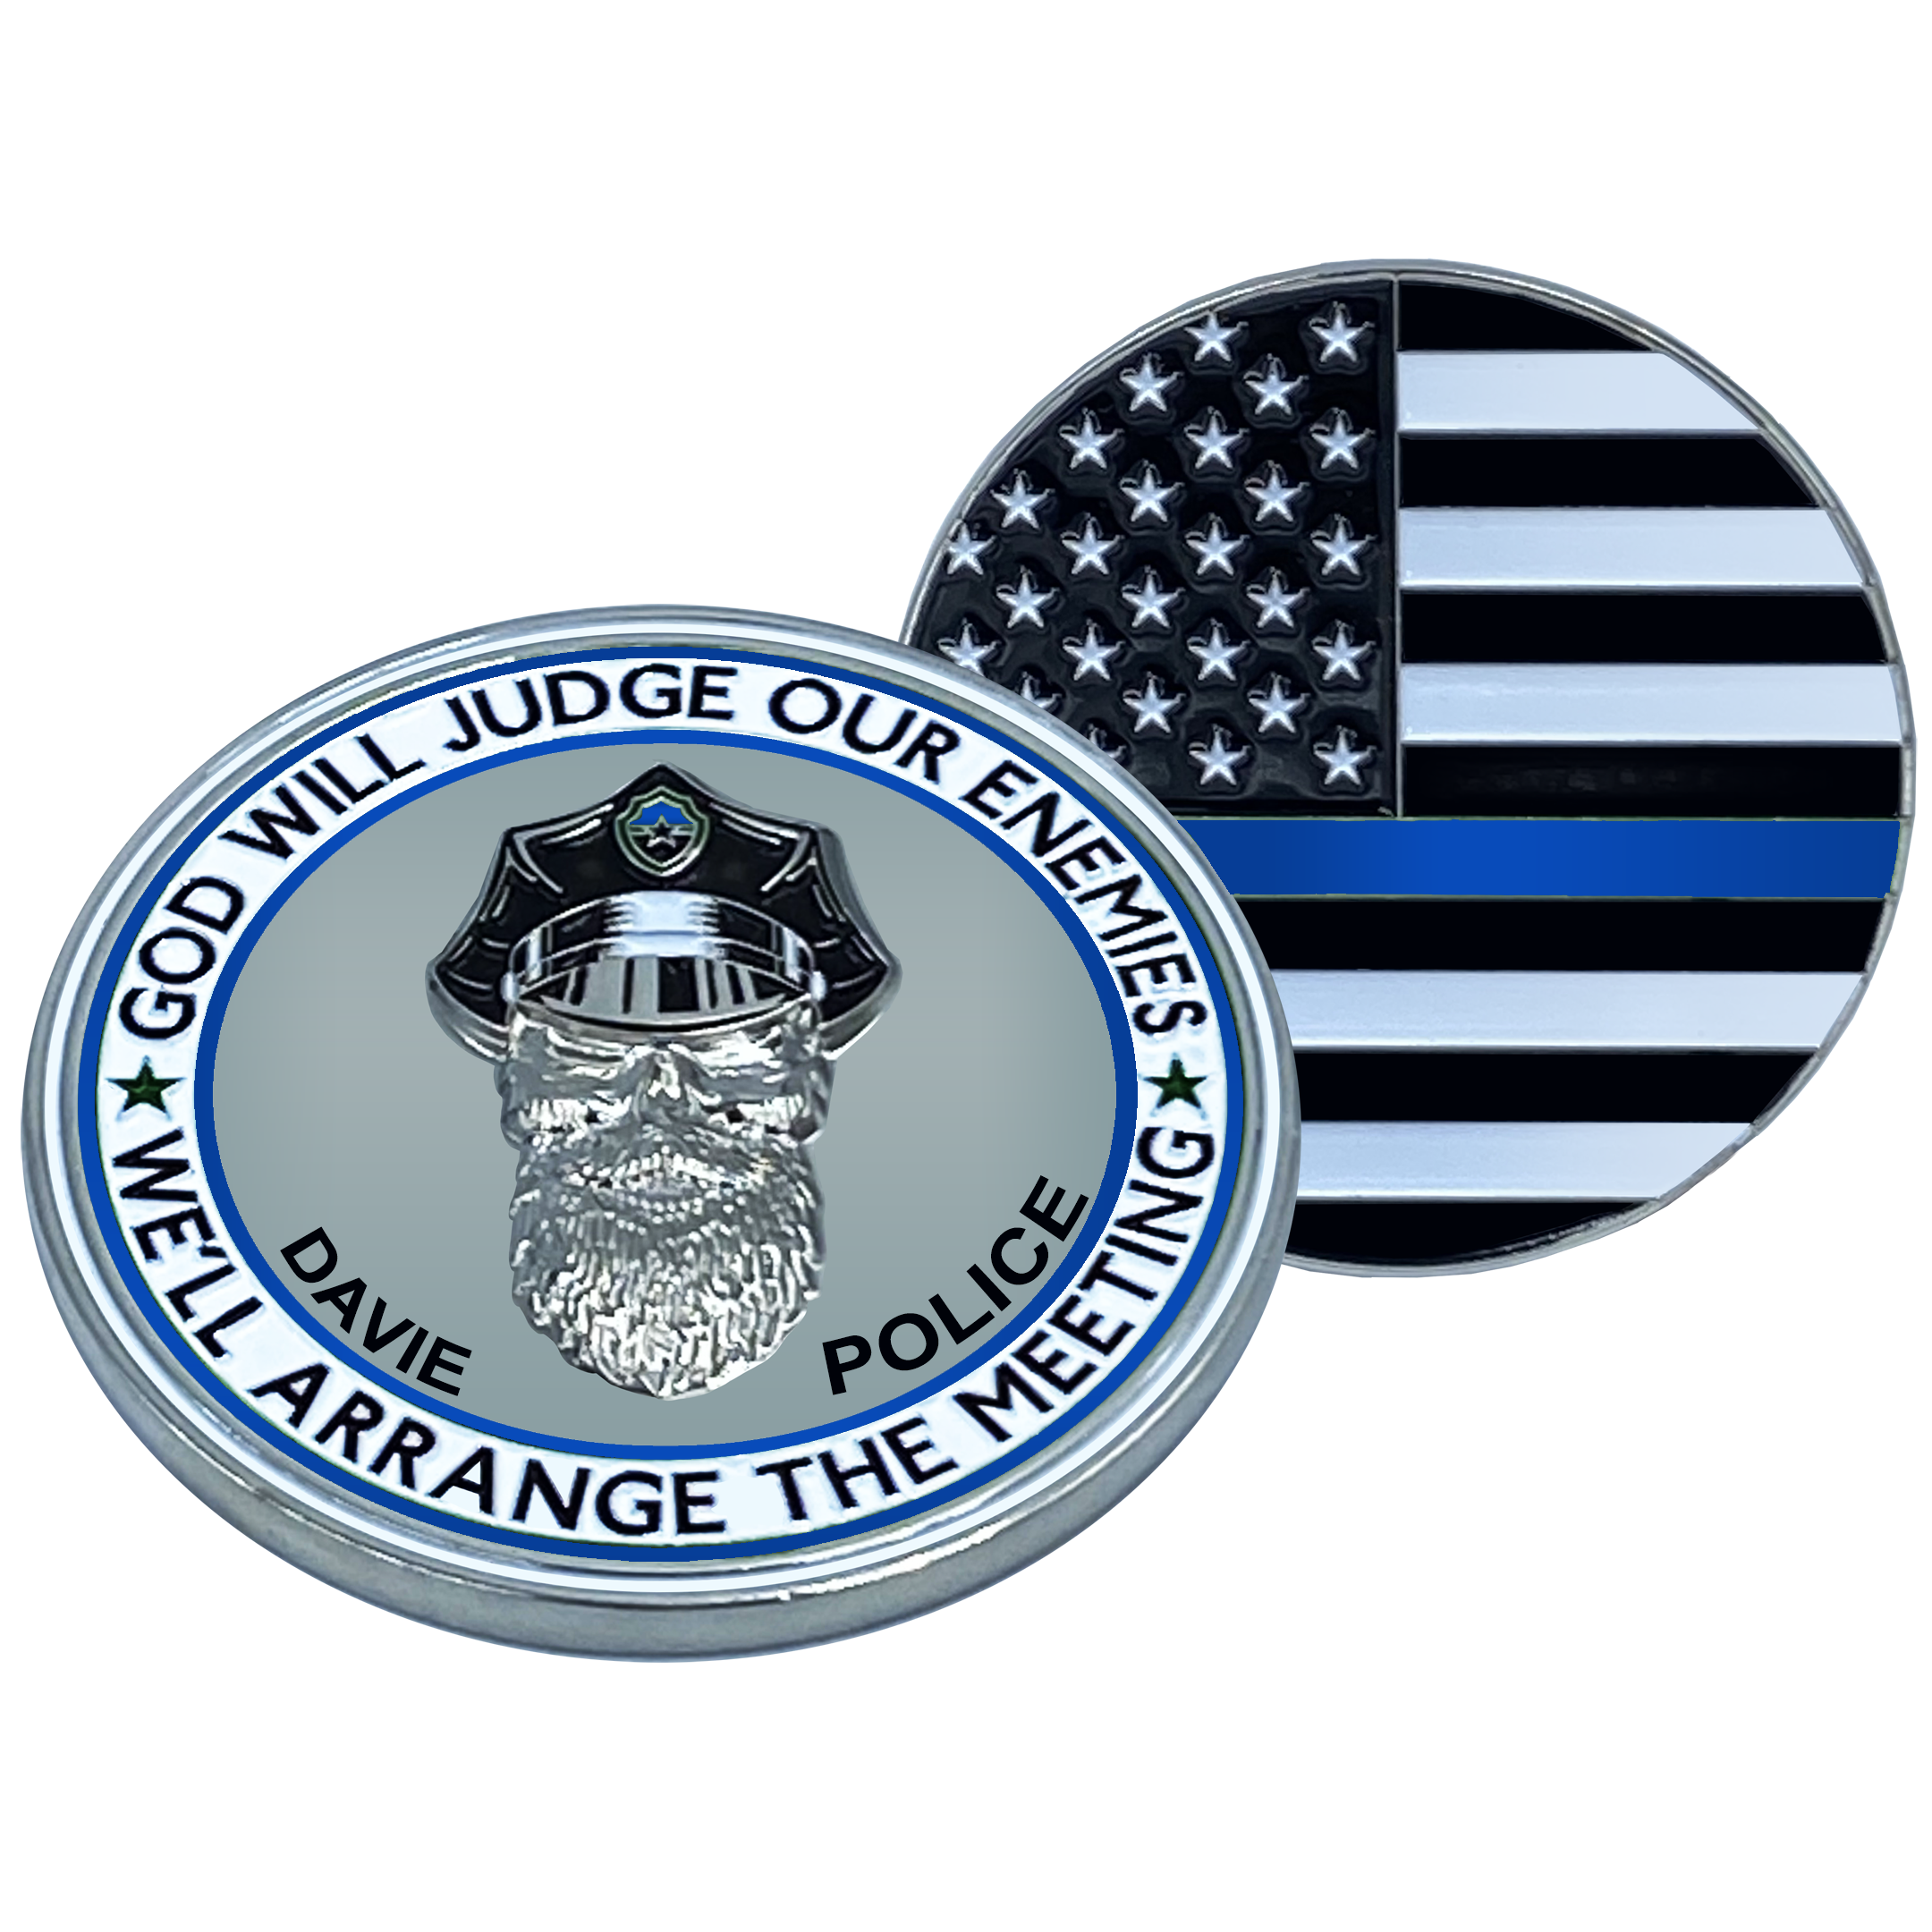 EL1-007 Thin Blue Line Davie Florida Police God Will Judge BEARD GANG SKULL Challenge Coin City of Police Department Broward Southwest Ranches Back the Blue